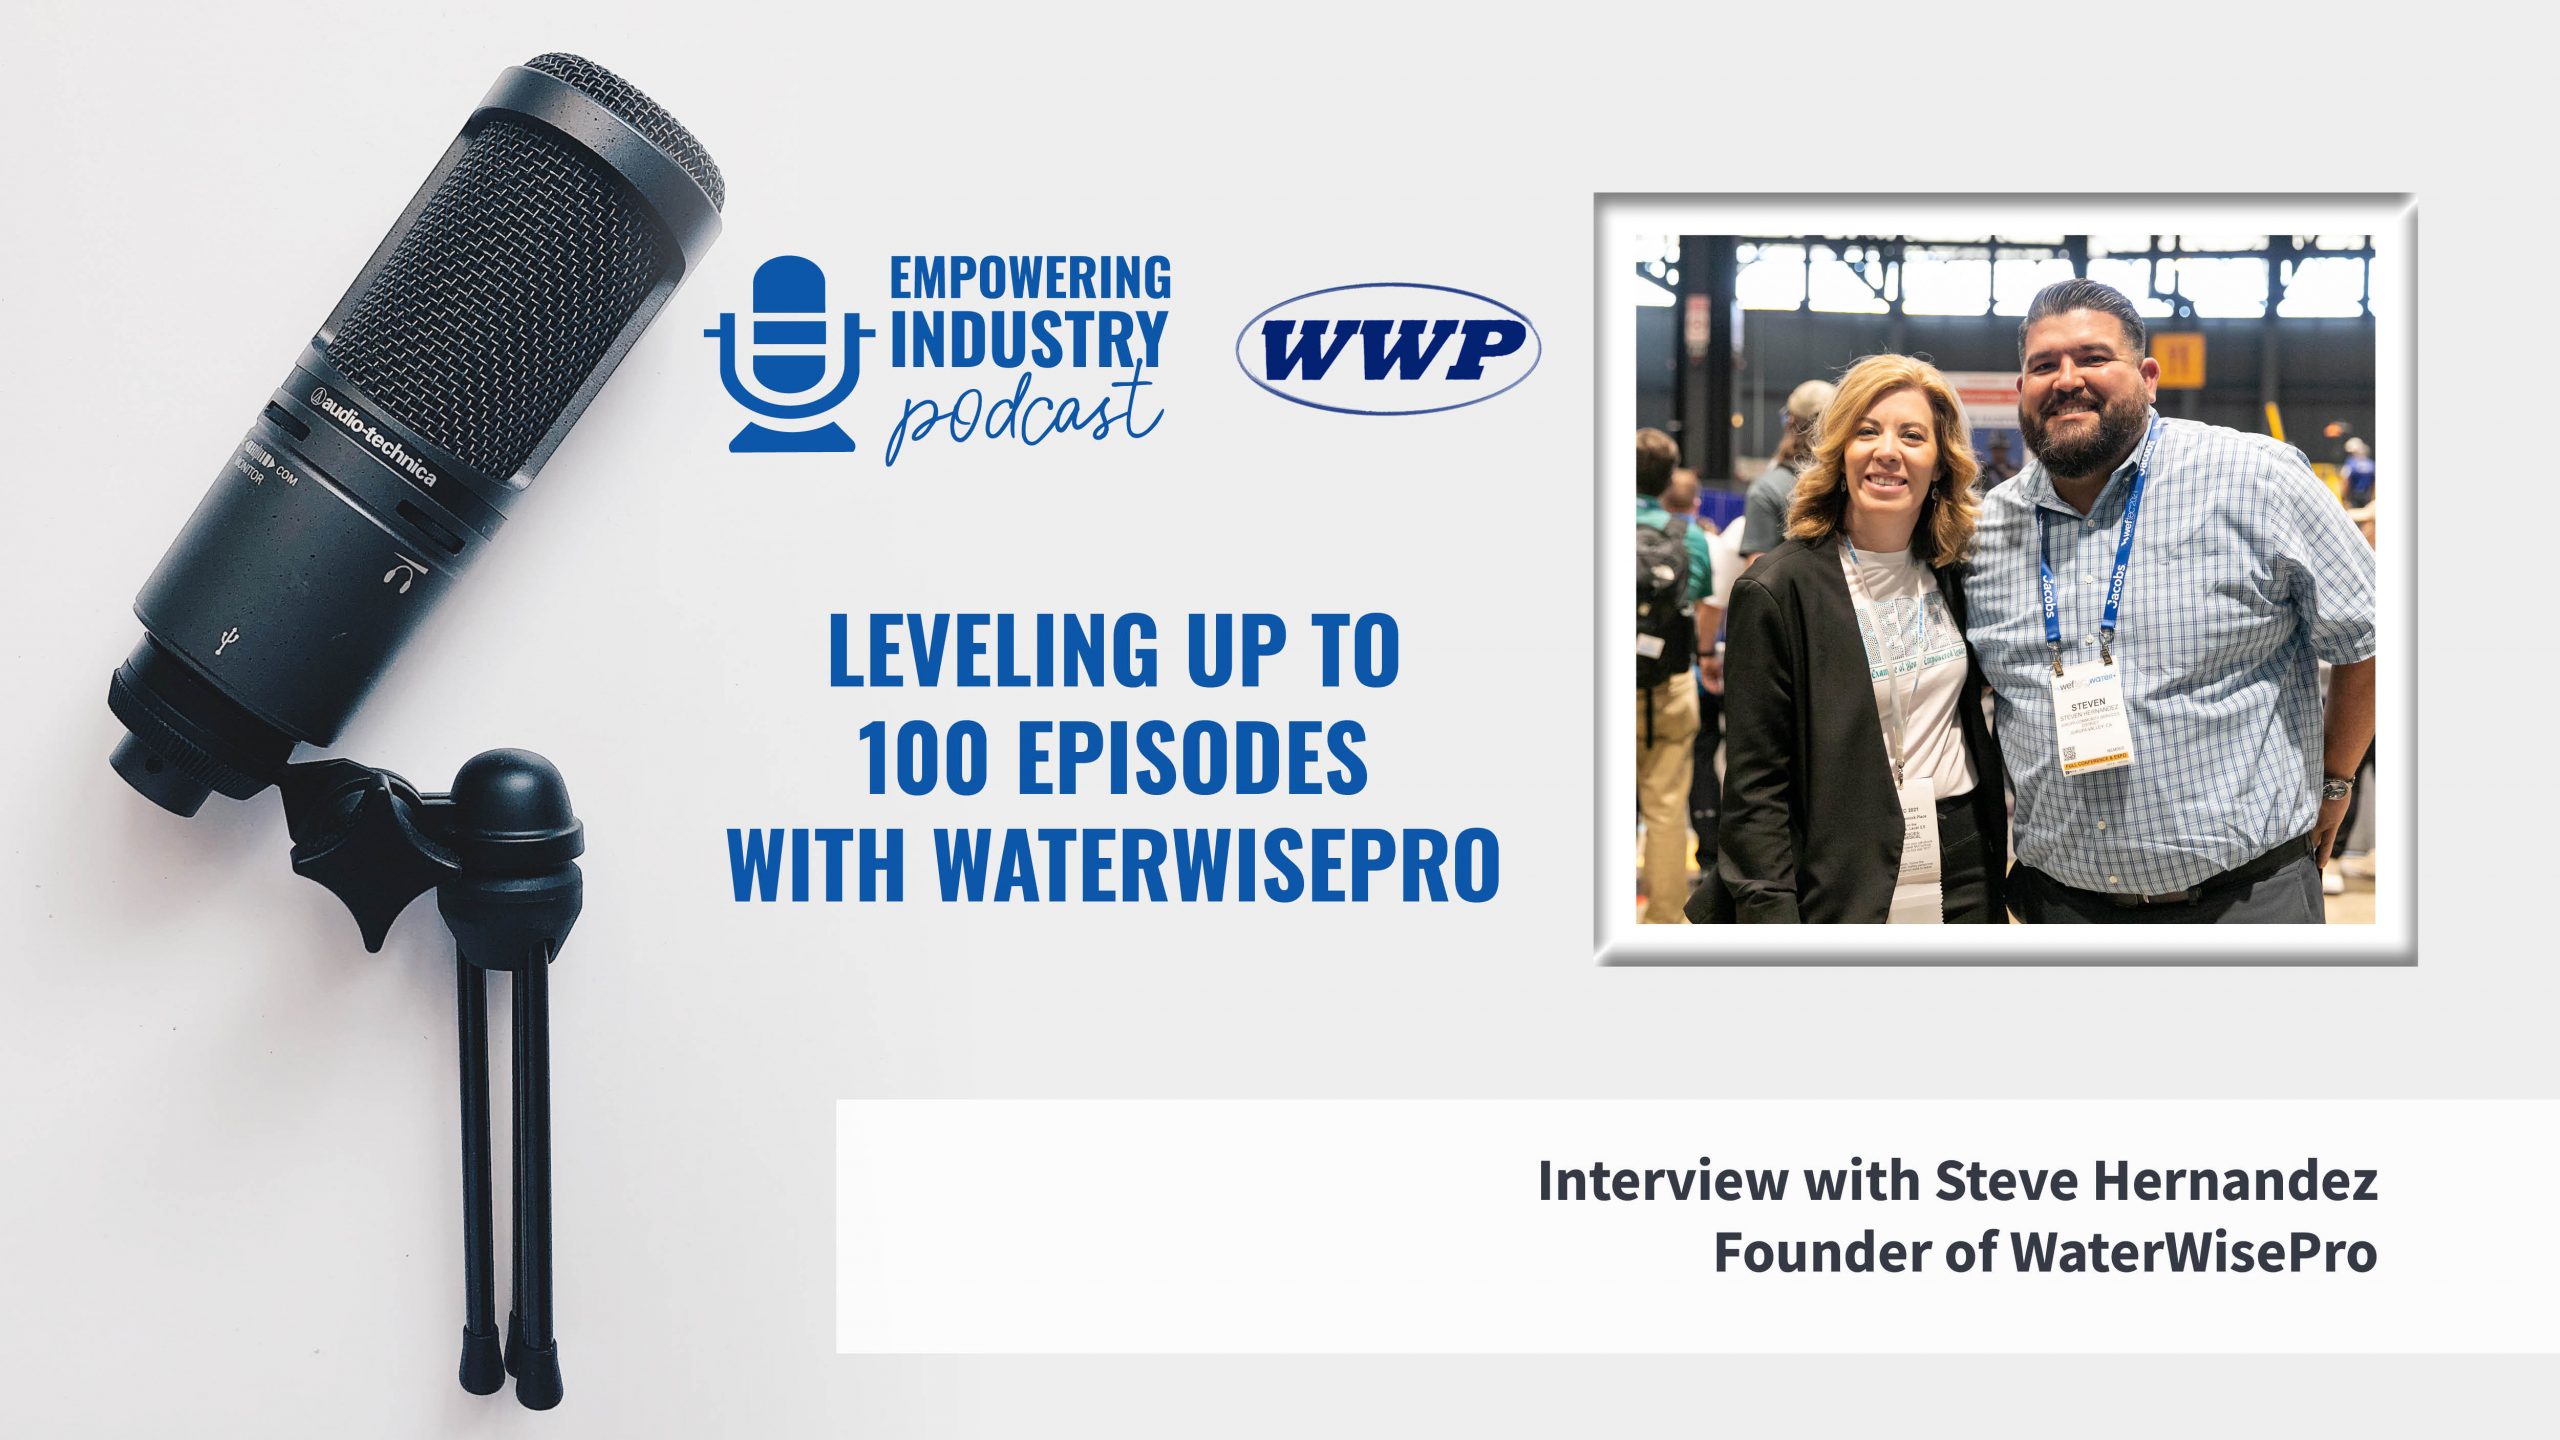 Leveling Up to 100 Episodes with the WaterWisePro